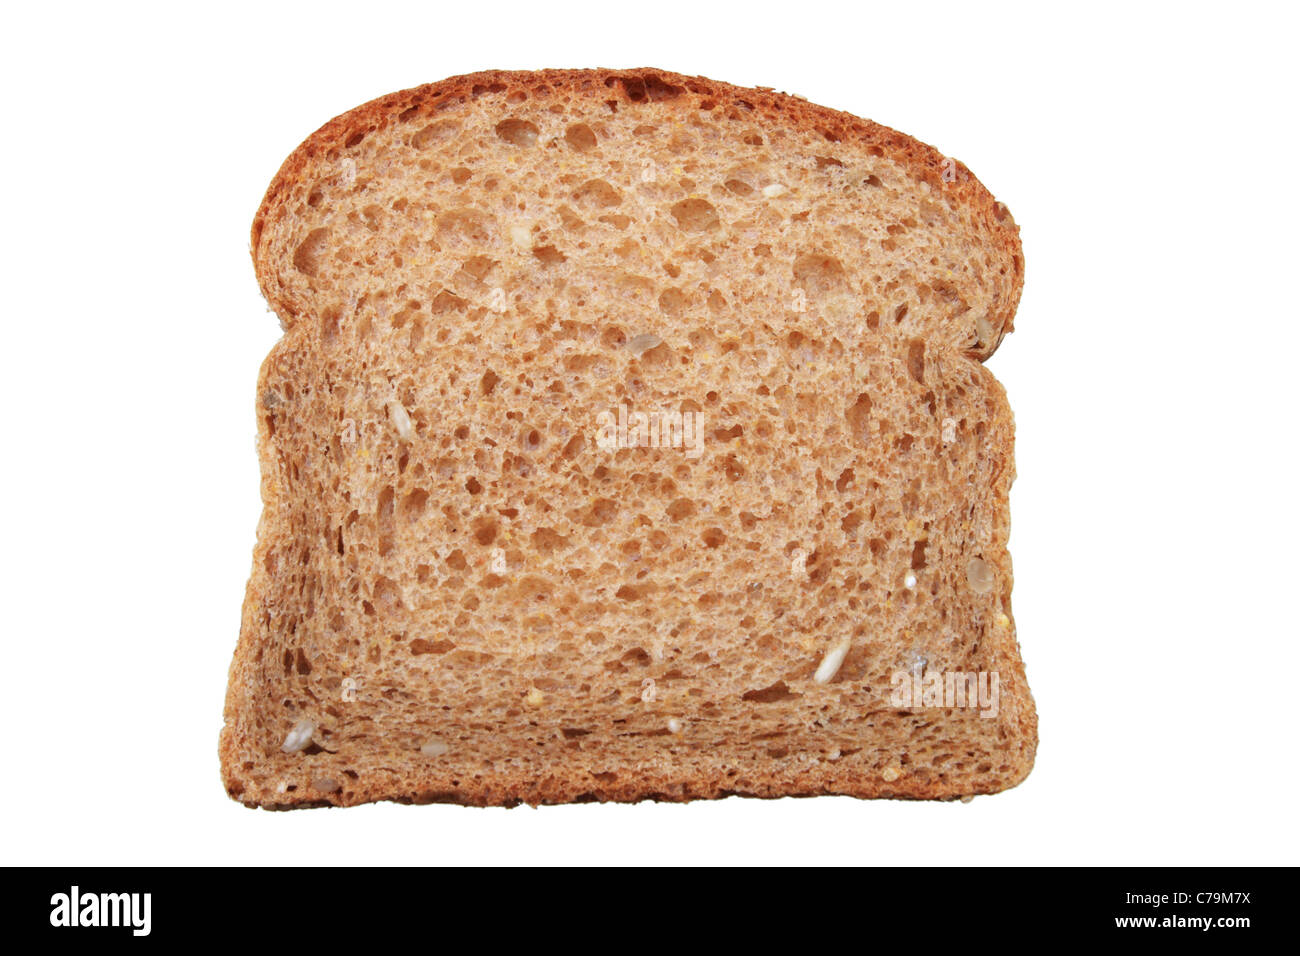 healthy whole wheat bread slice isolated on white Stock Photo